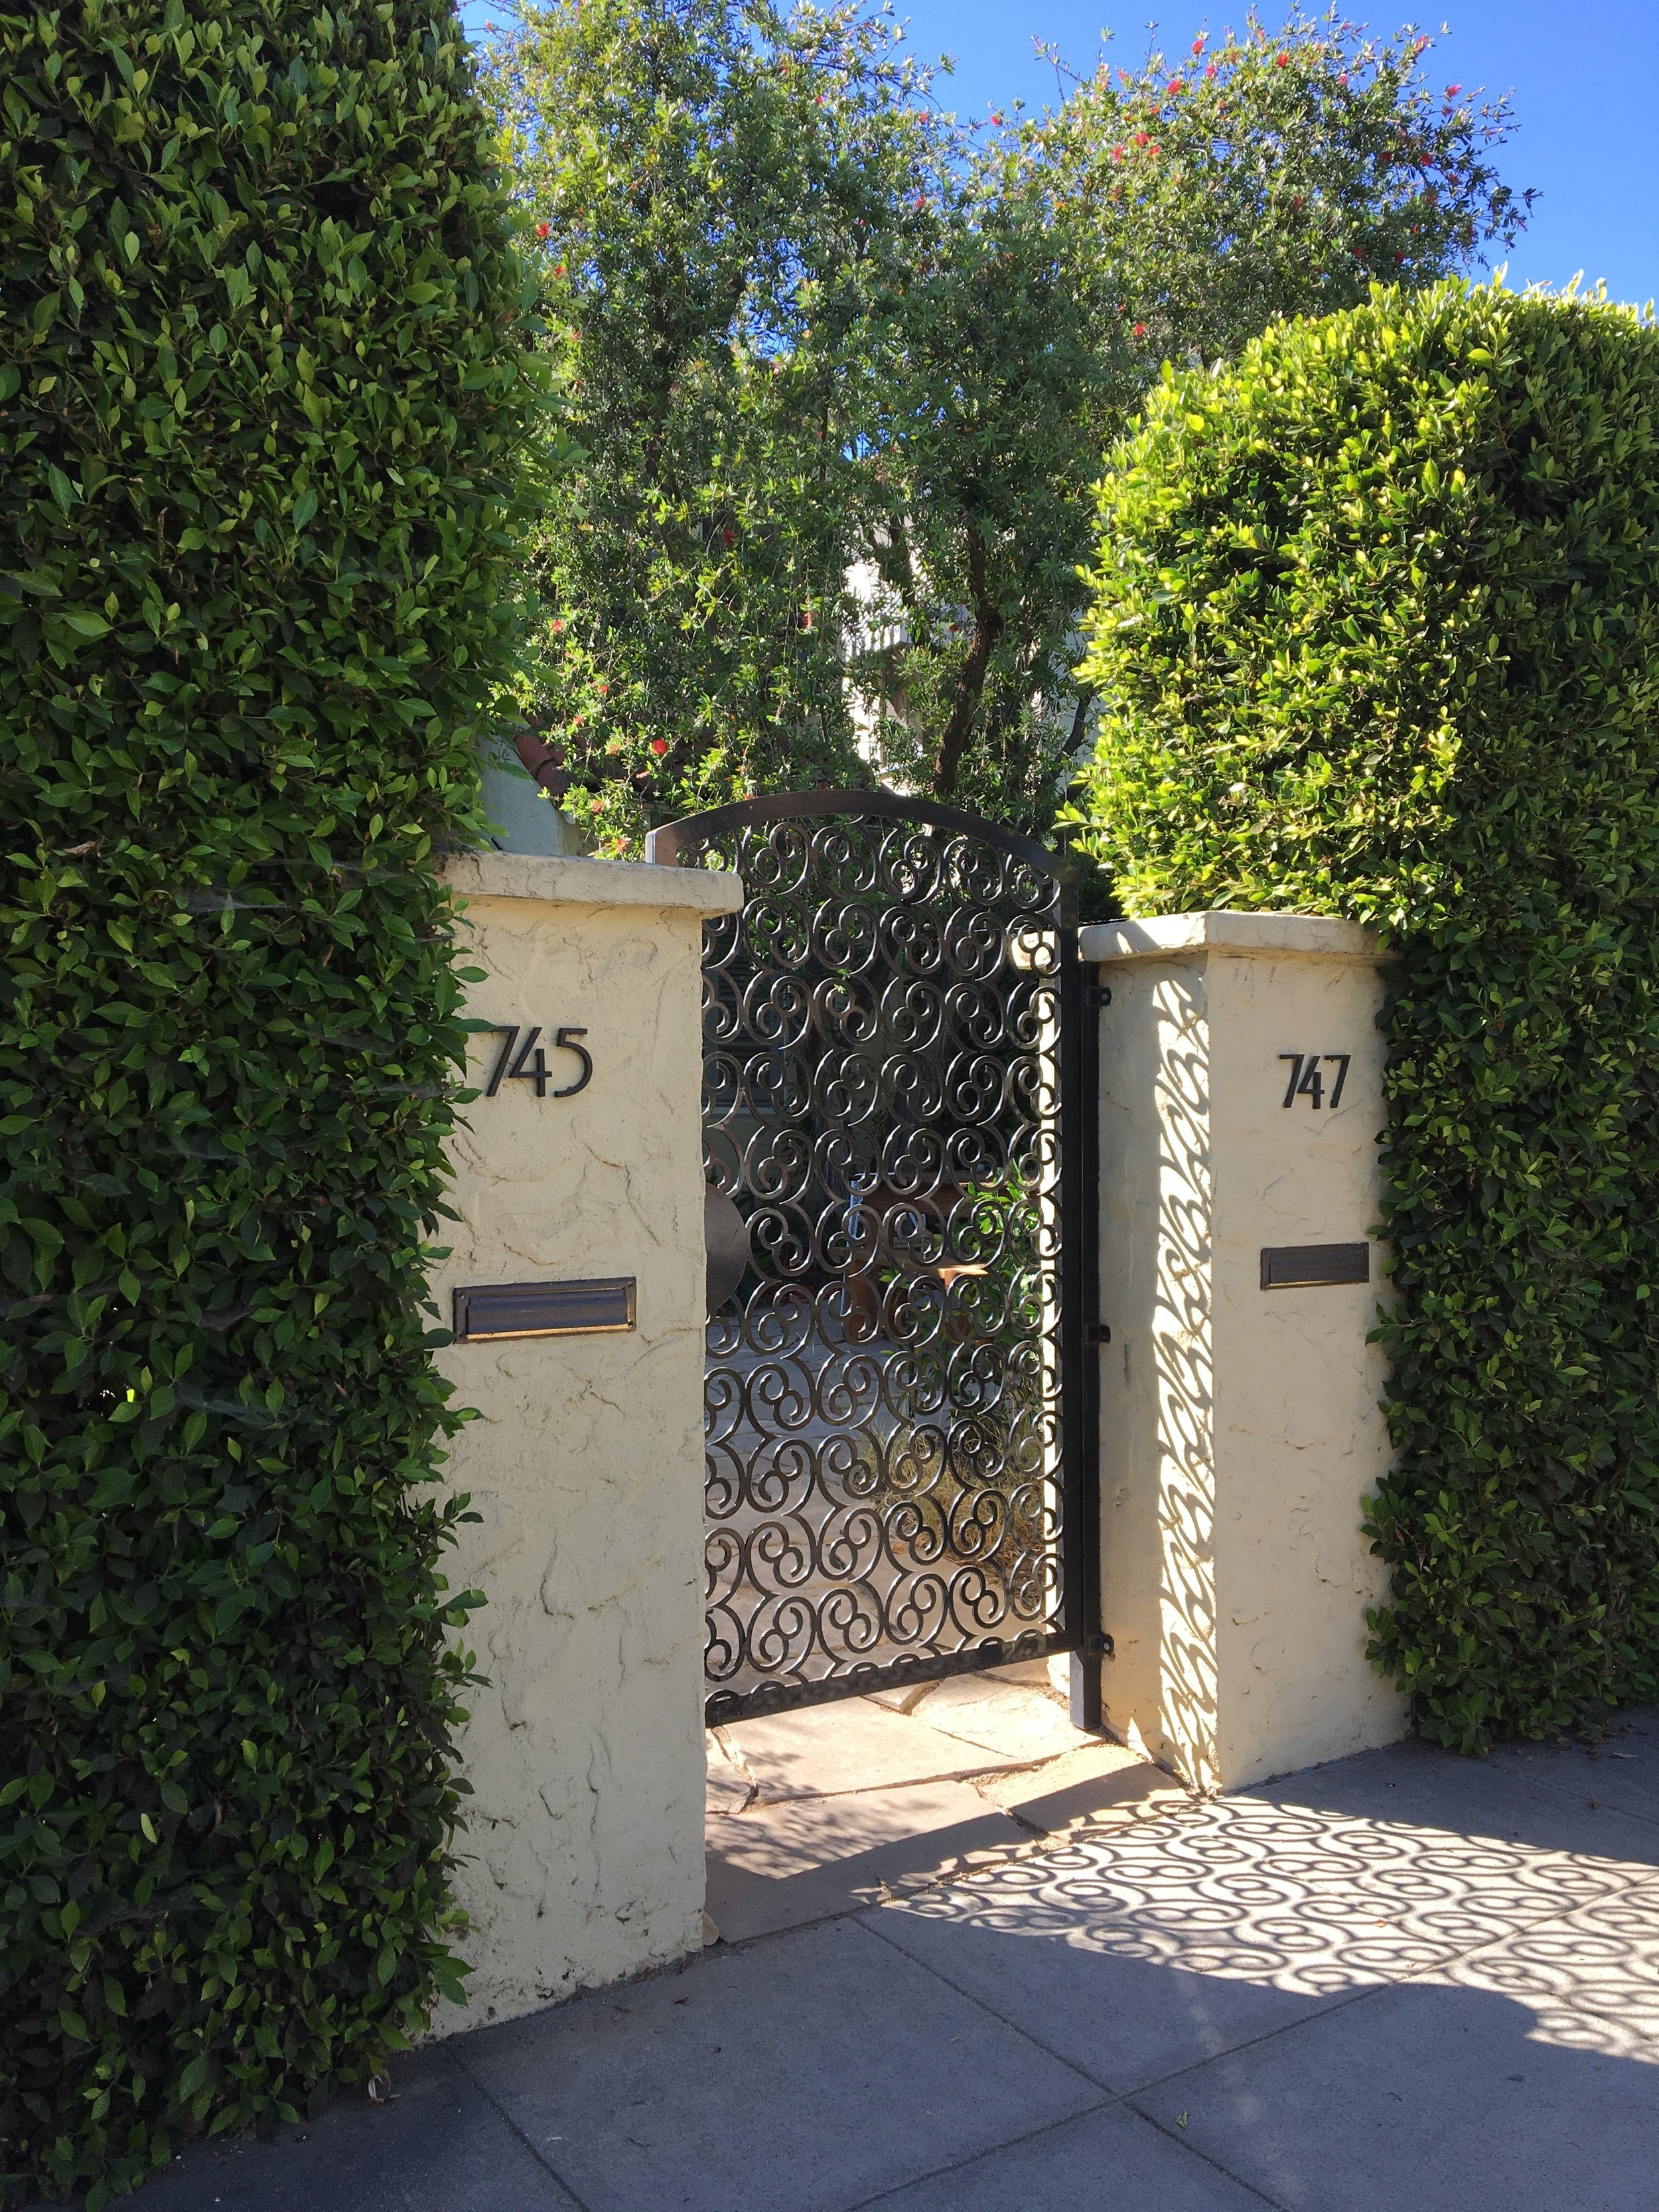  A custom design for a gate with a modern take on the pattern of the existing railings around the house 